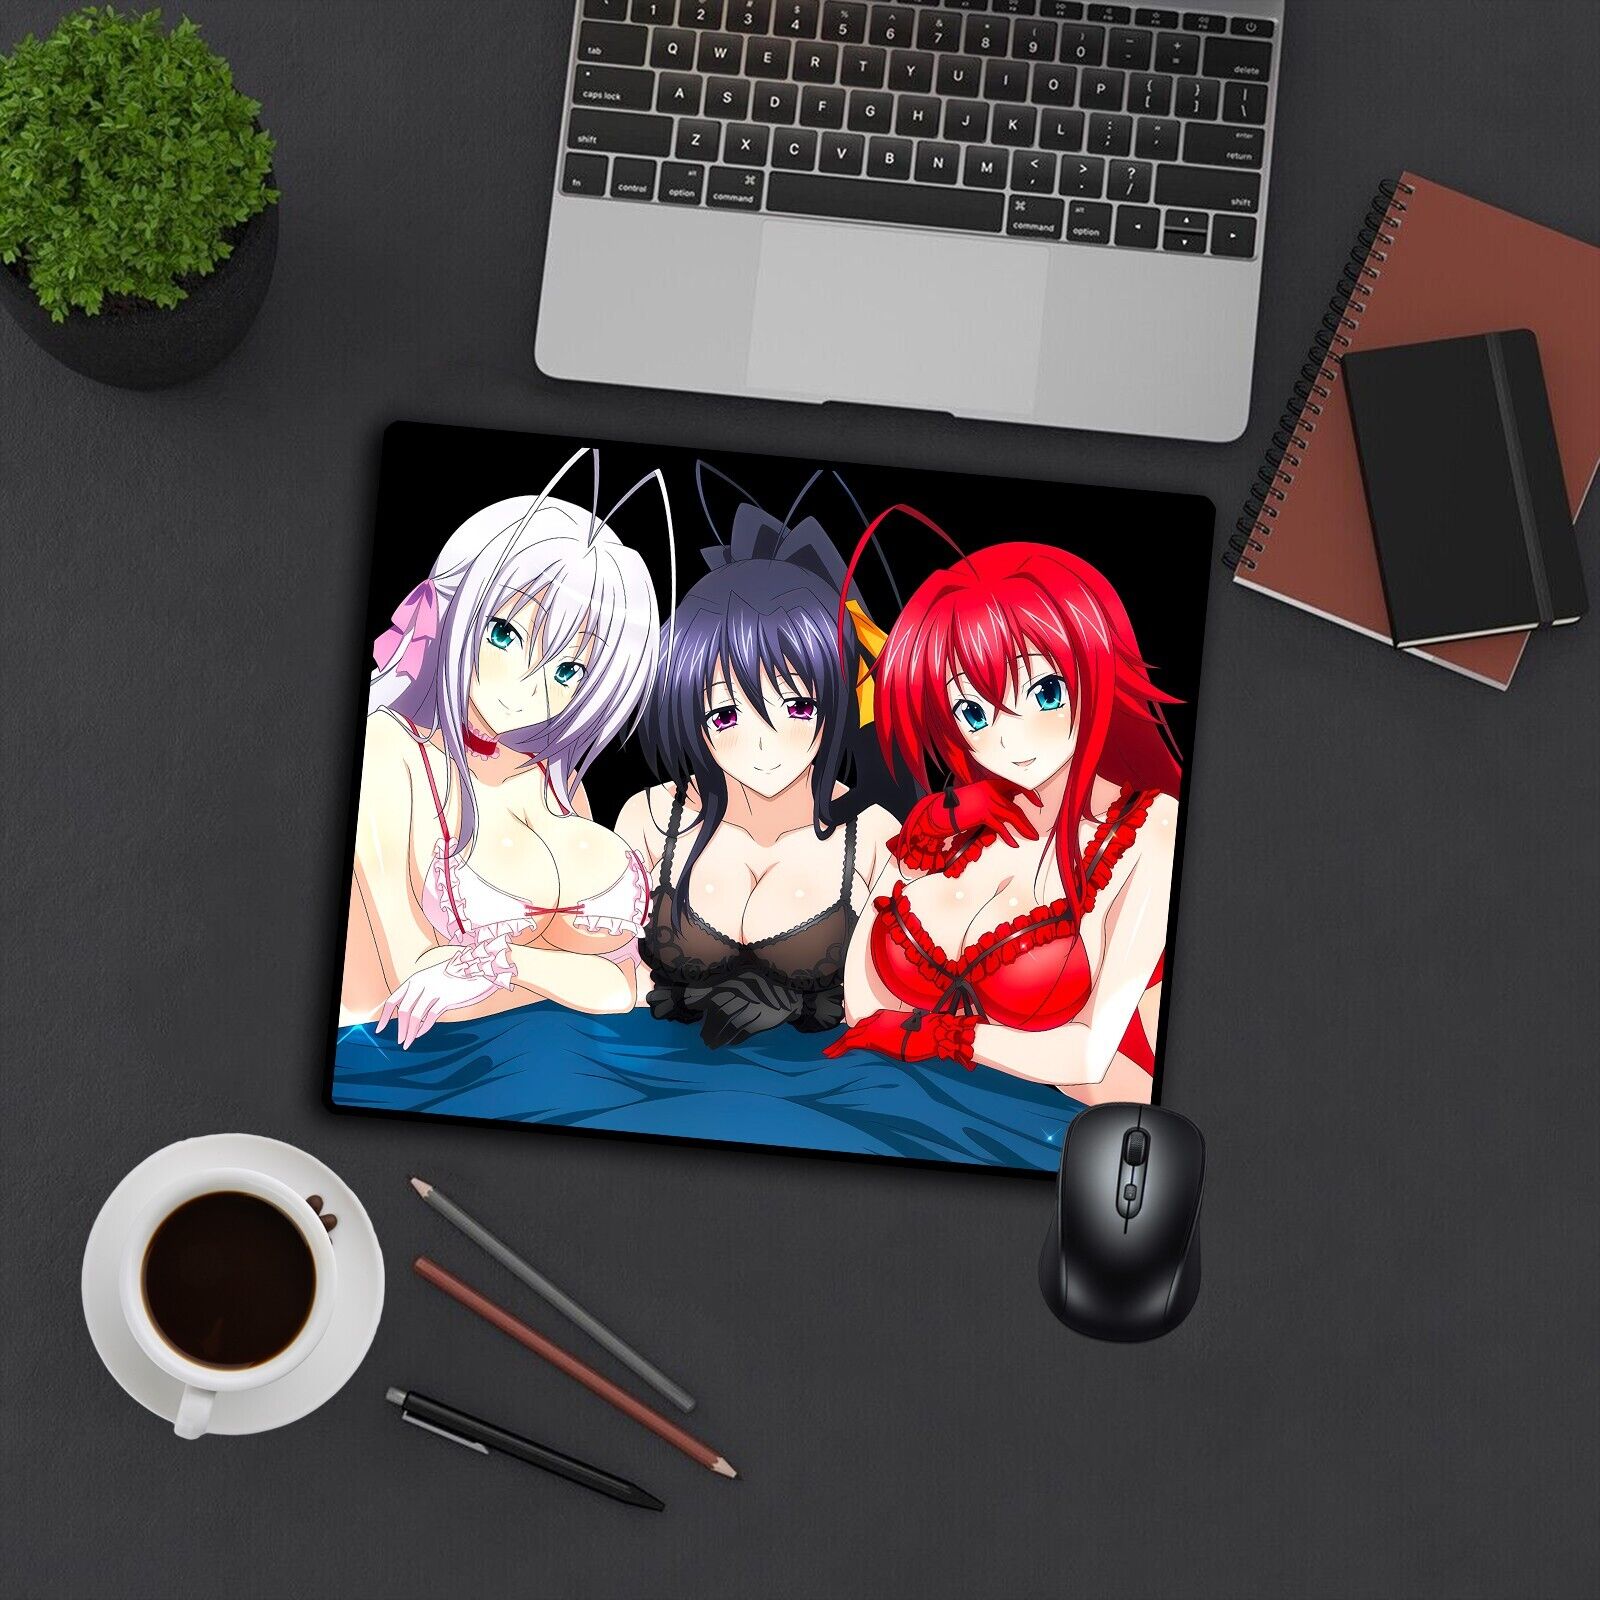 Sexy Rias Gremory Computer Anime Mouse Pad Mat Keyboard Desk Non Slip 9.8x11.8in